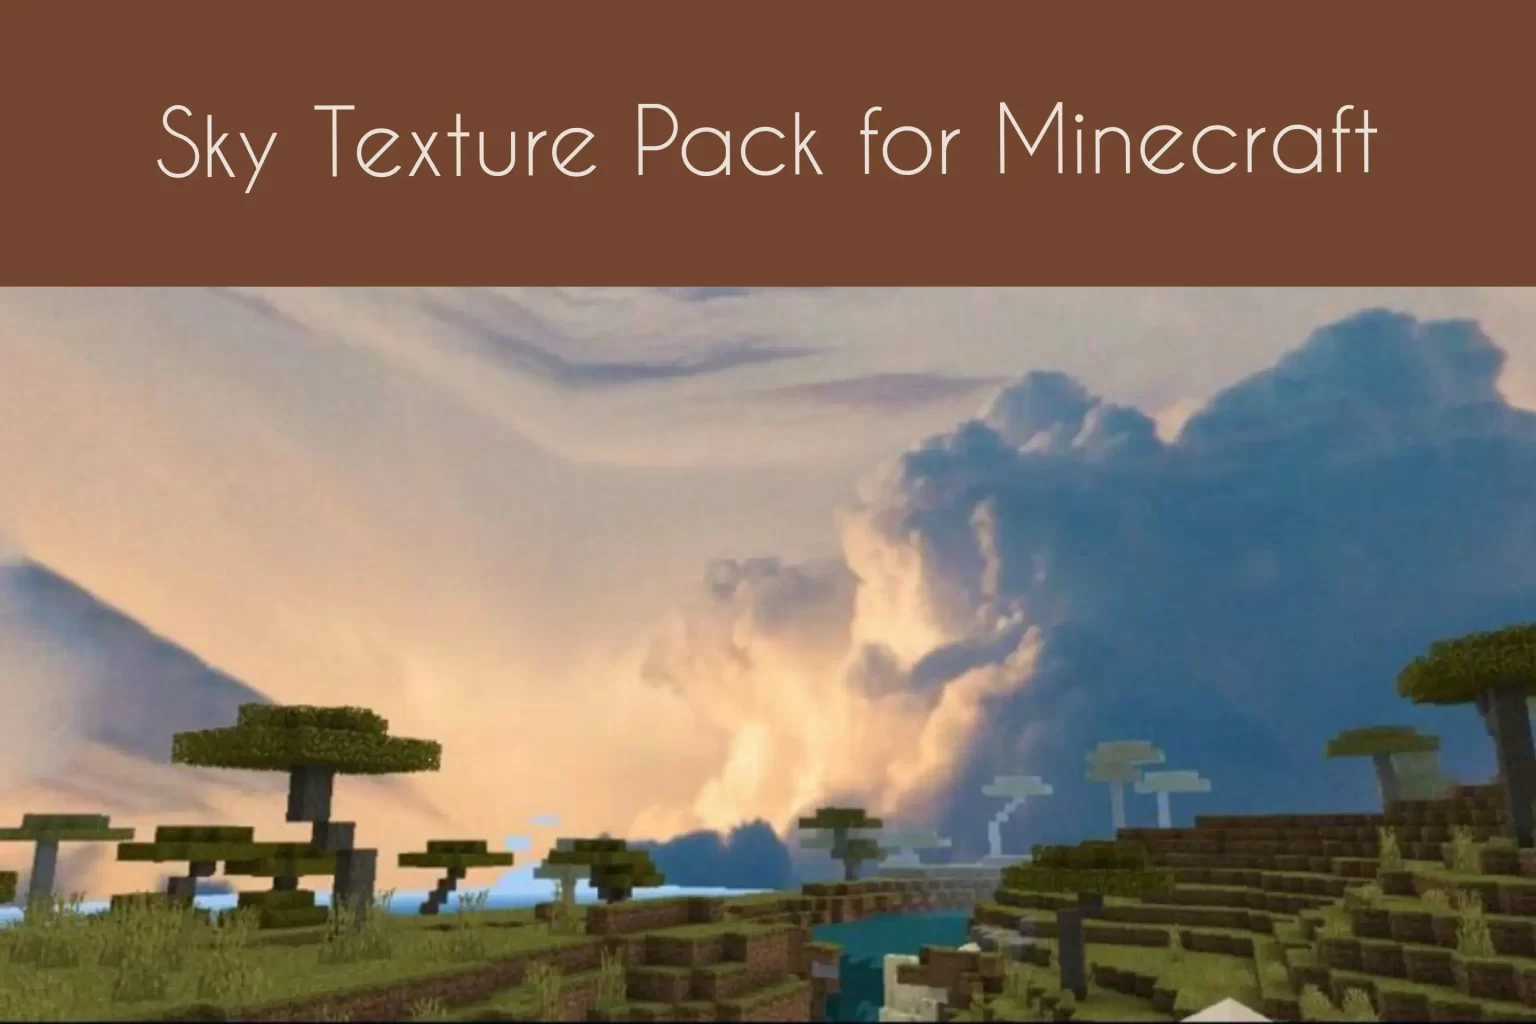 Sky Texture Pack for Minecraft
